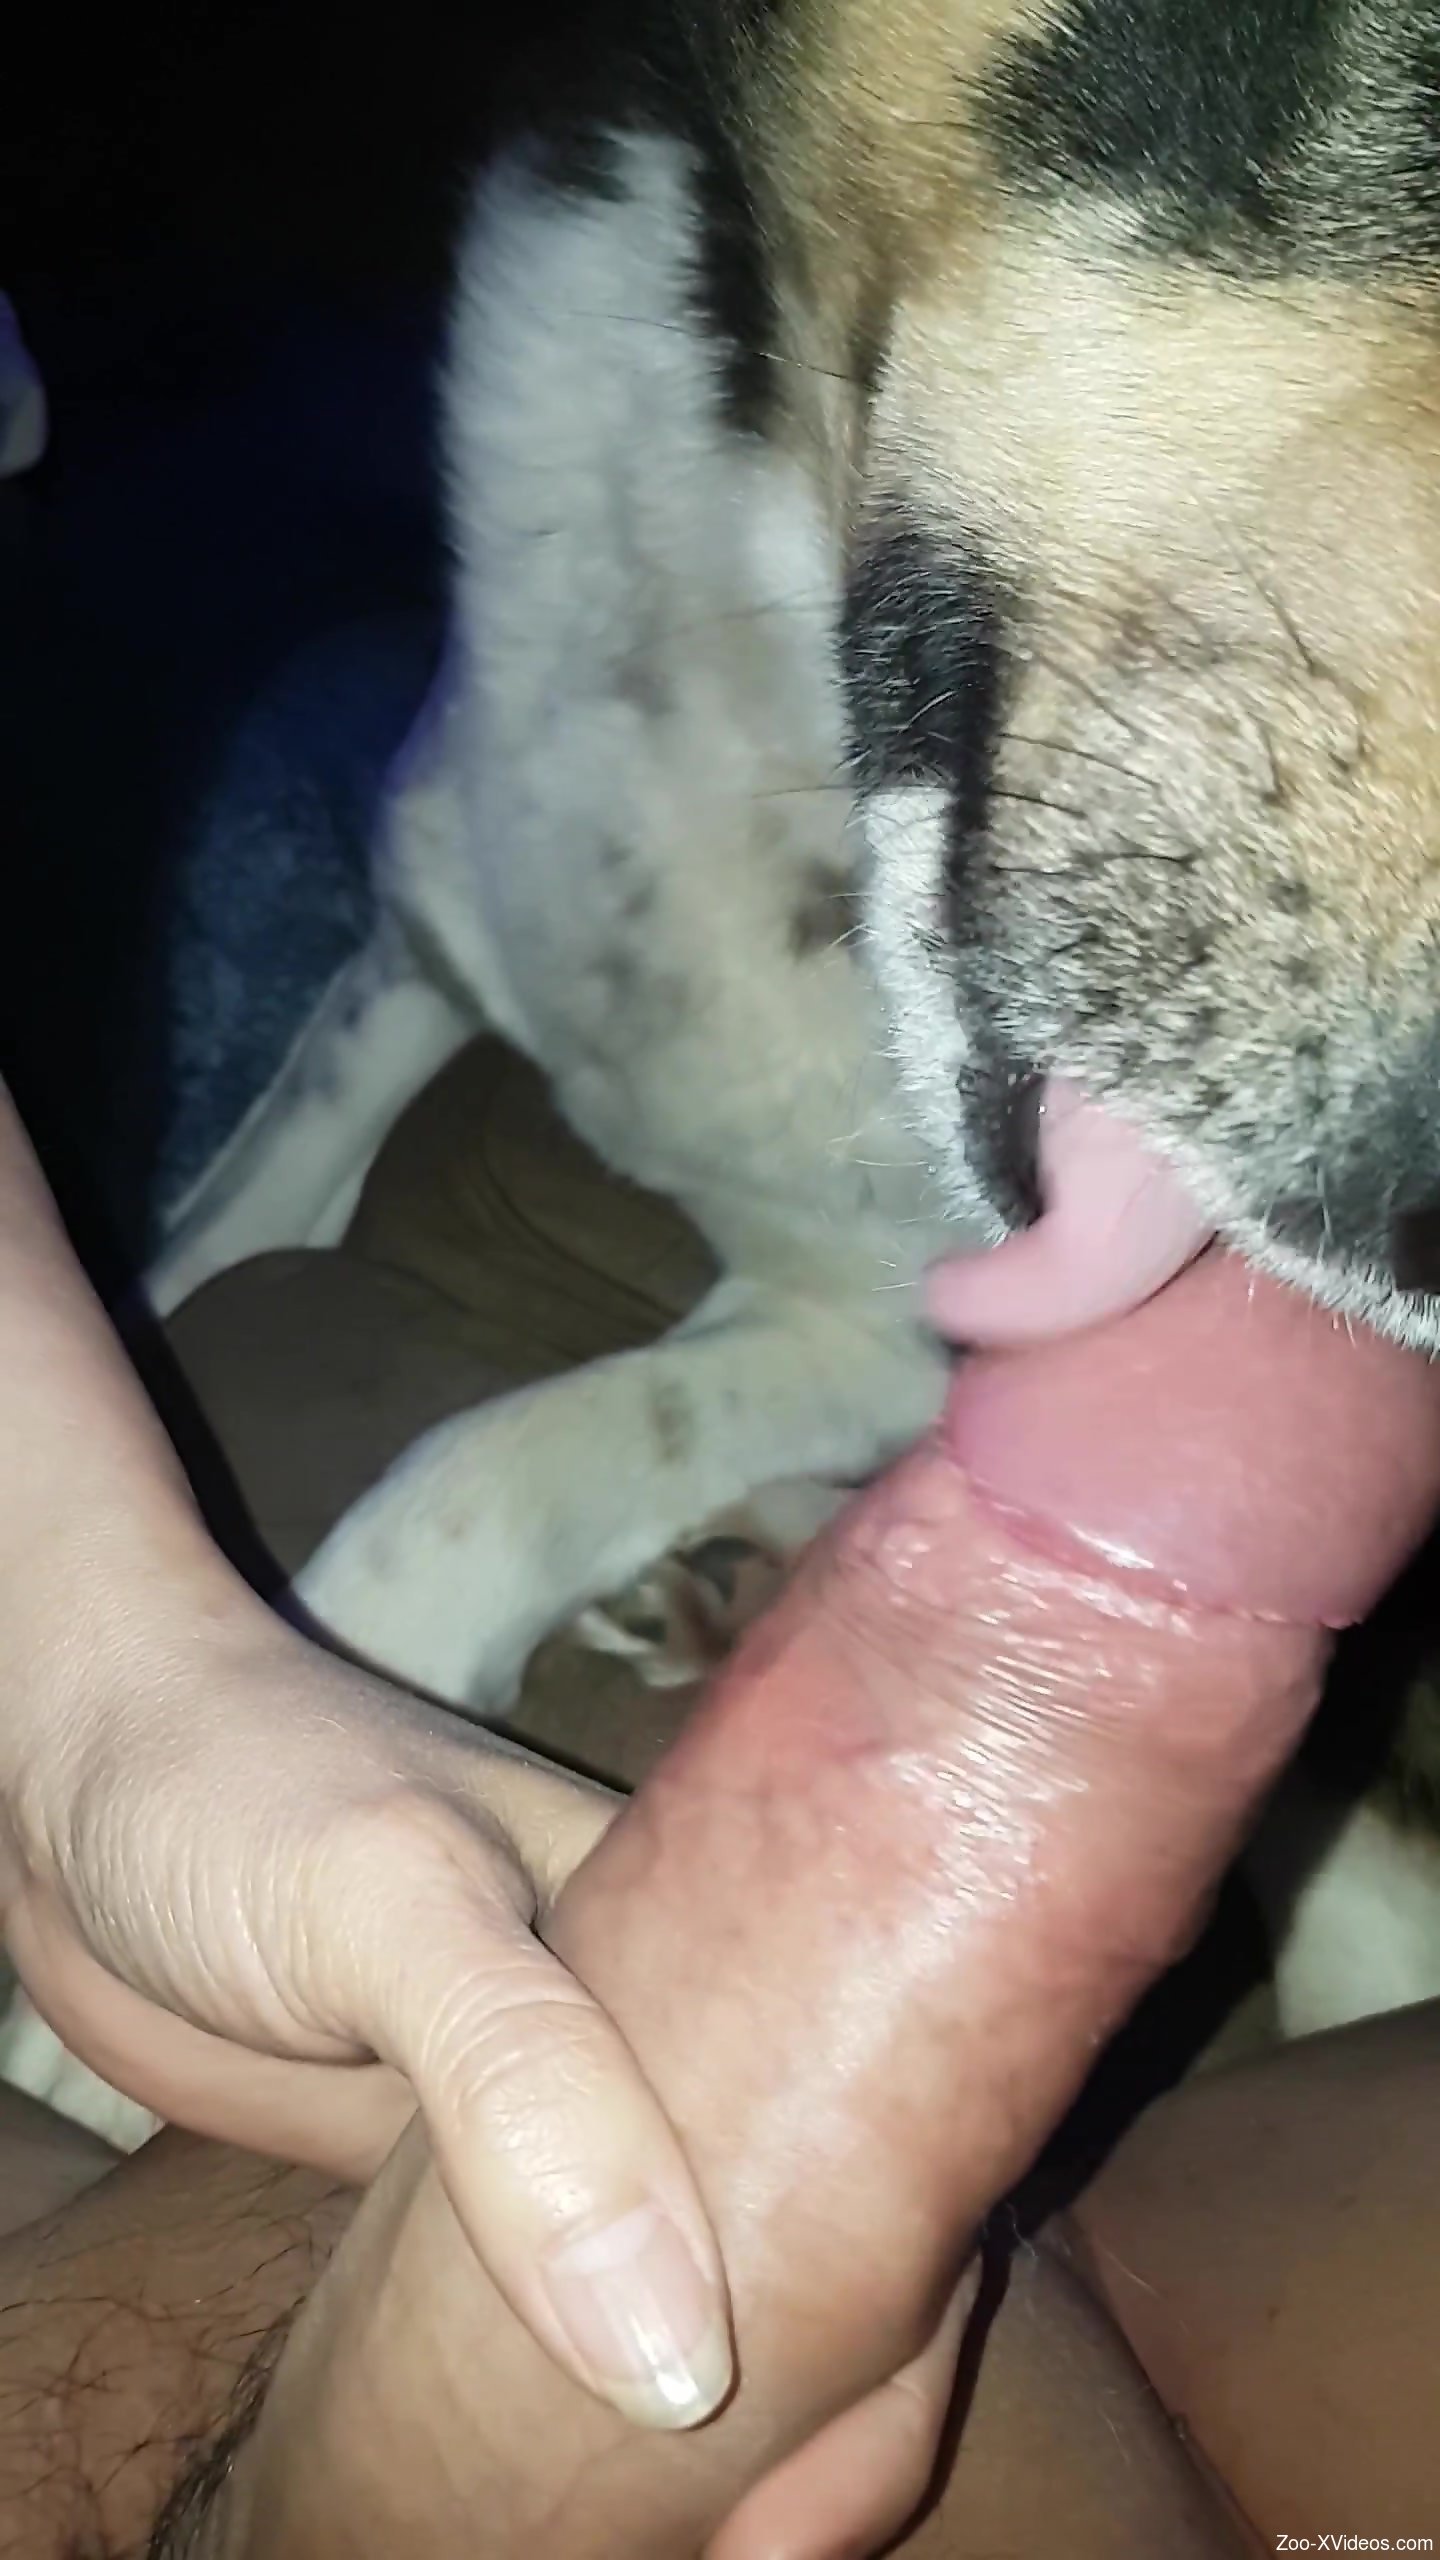 Aroused man loves how the dog licks his erect dick